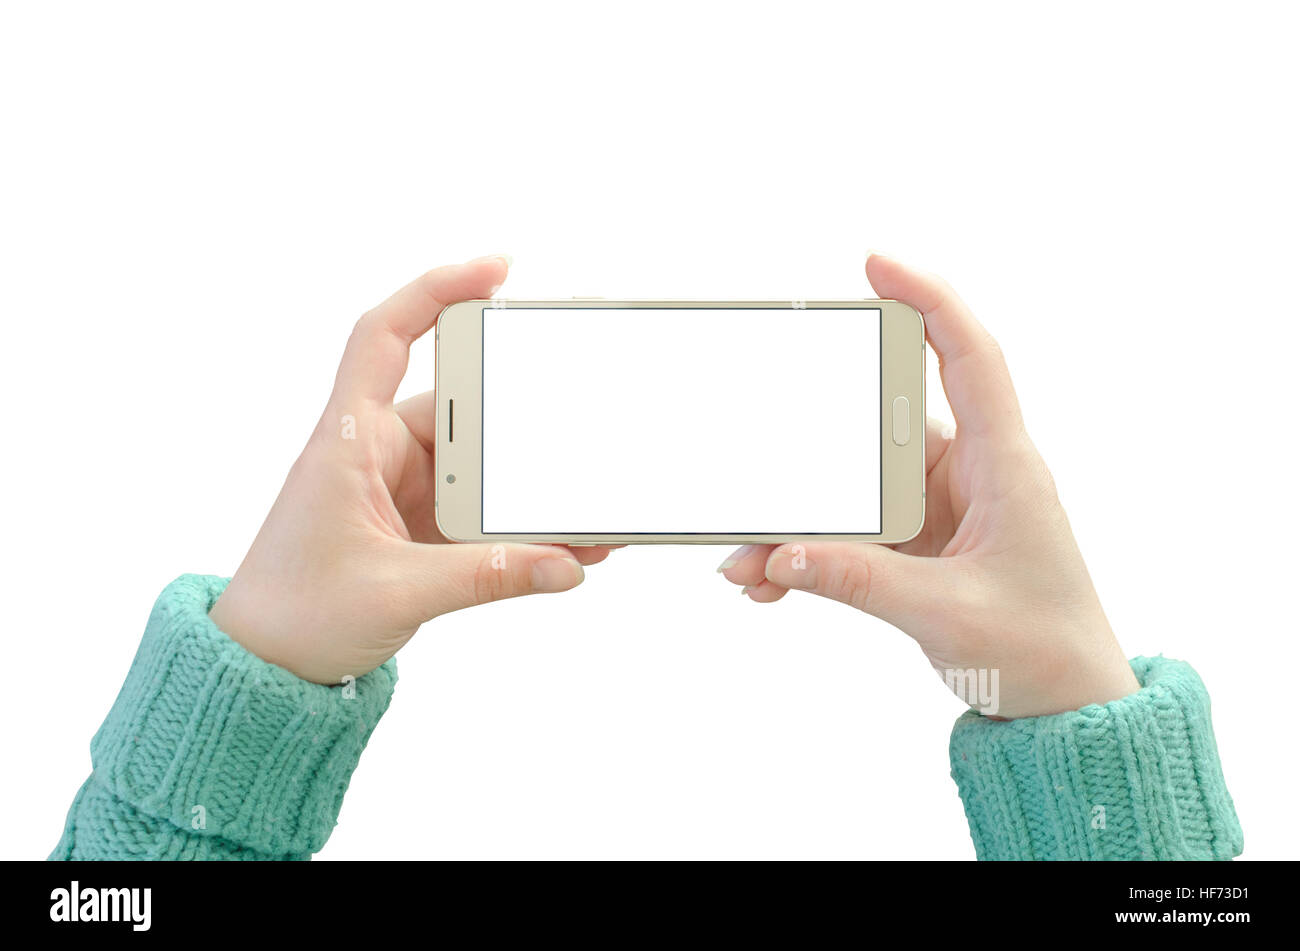 Mobile phone in woman hand. Horizontal position with isolated screen and background. Stock Photo